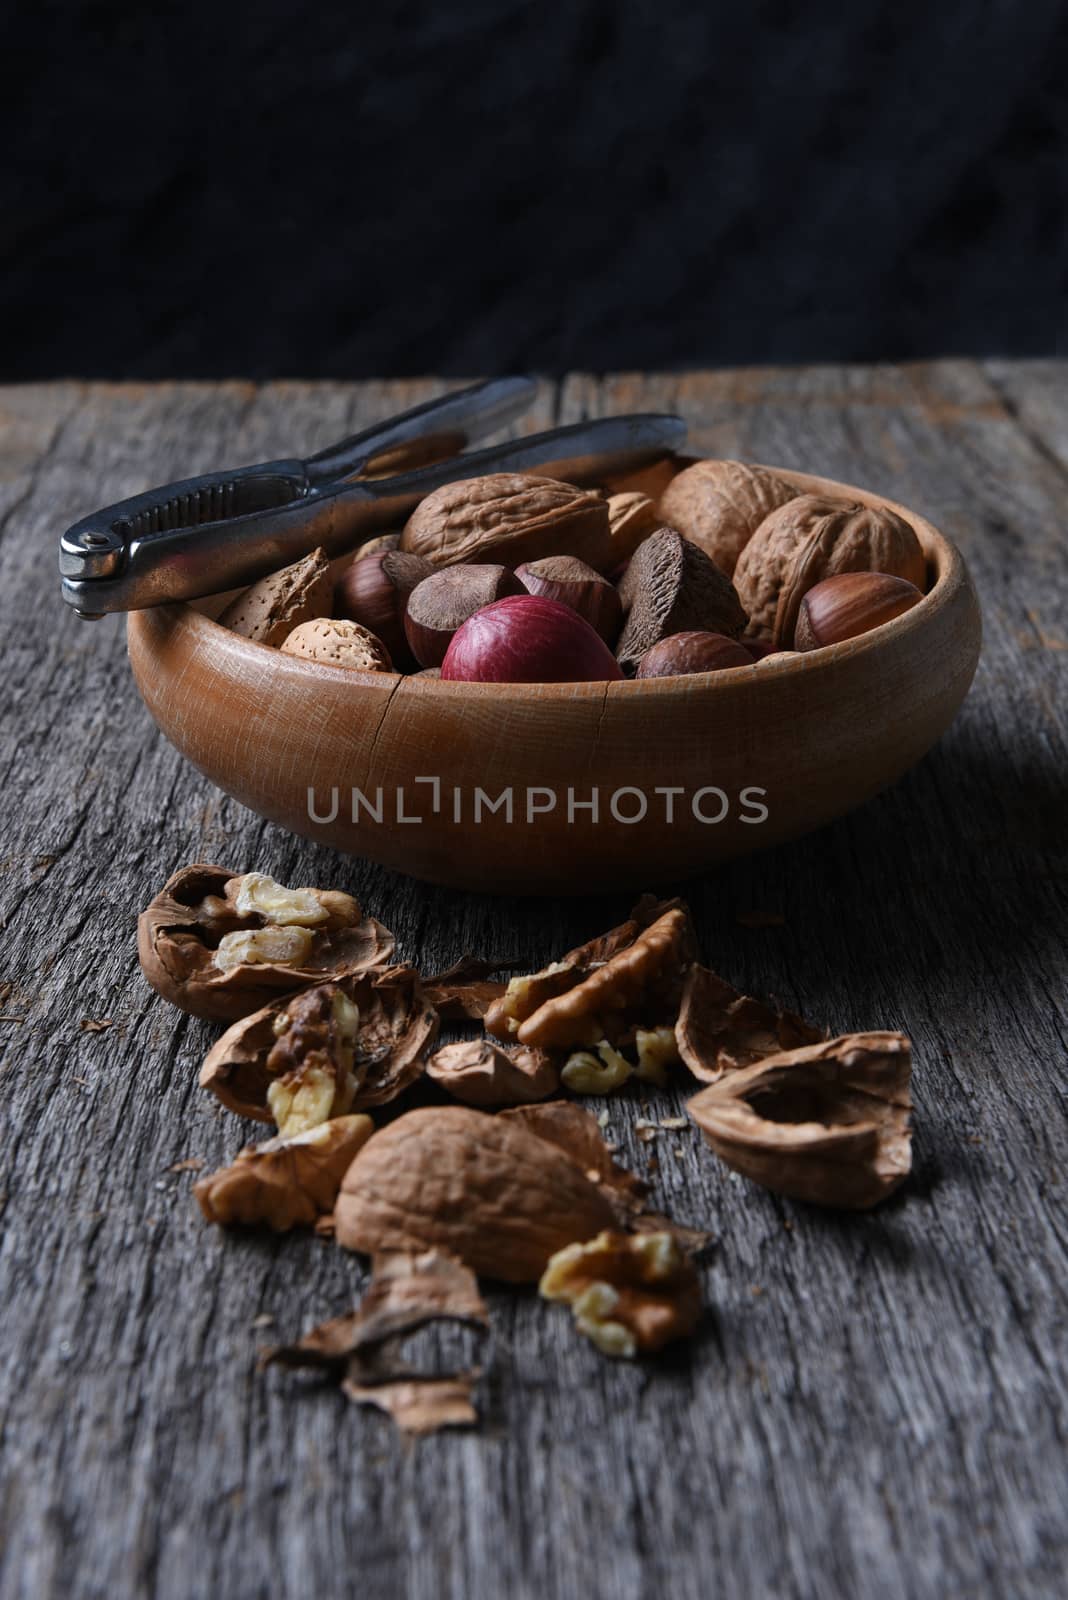 Nut Bowl and Cracked Walnuts by sCukrov